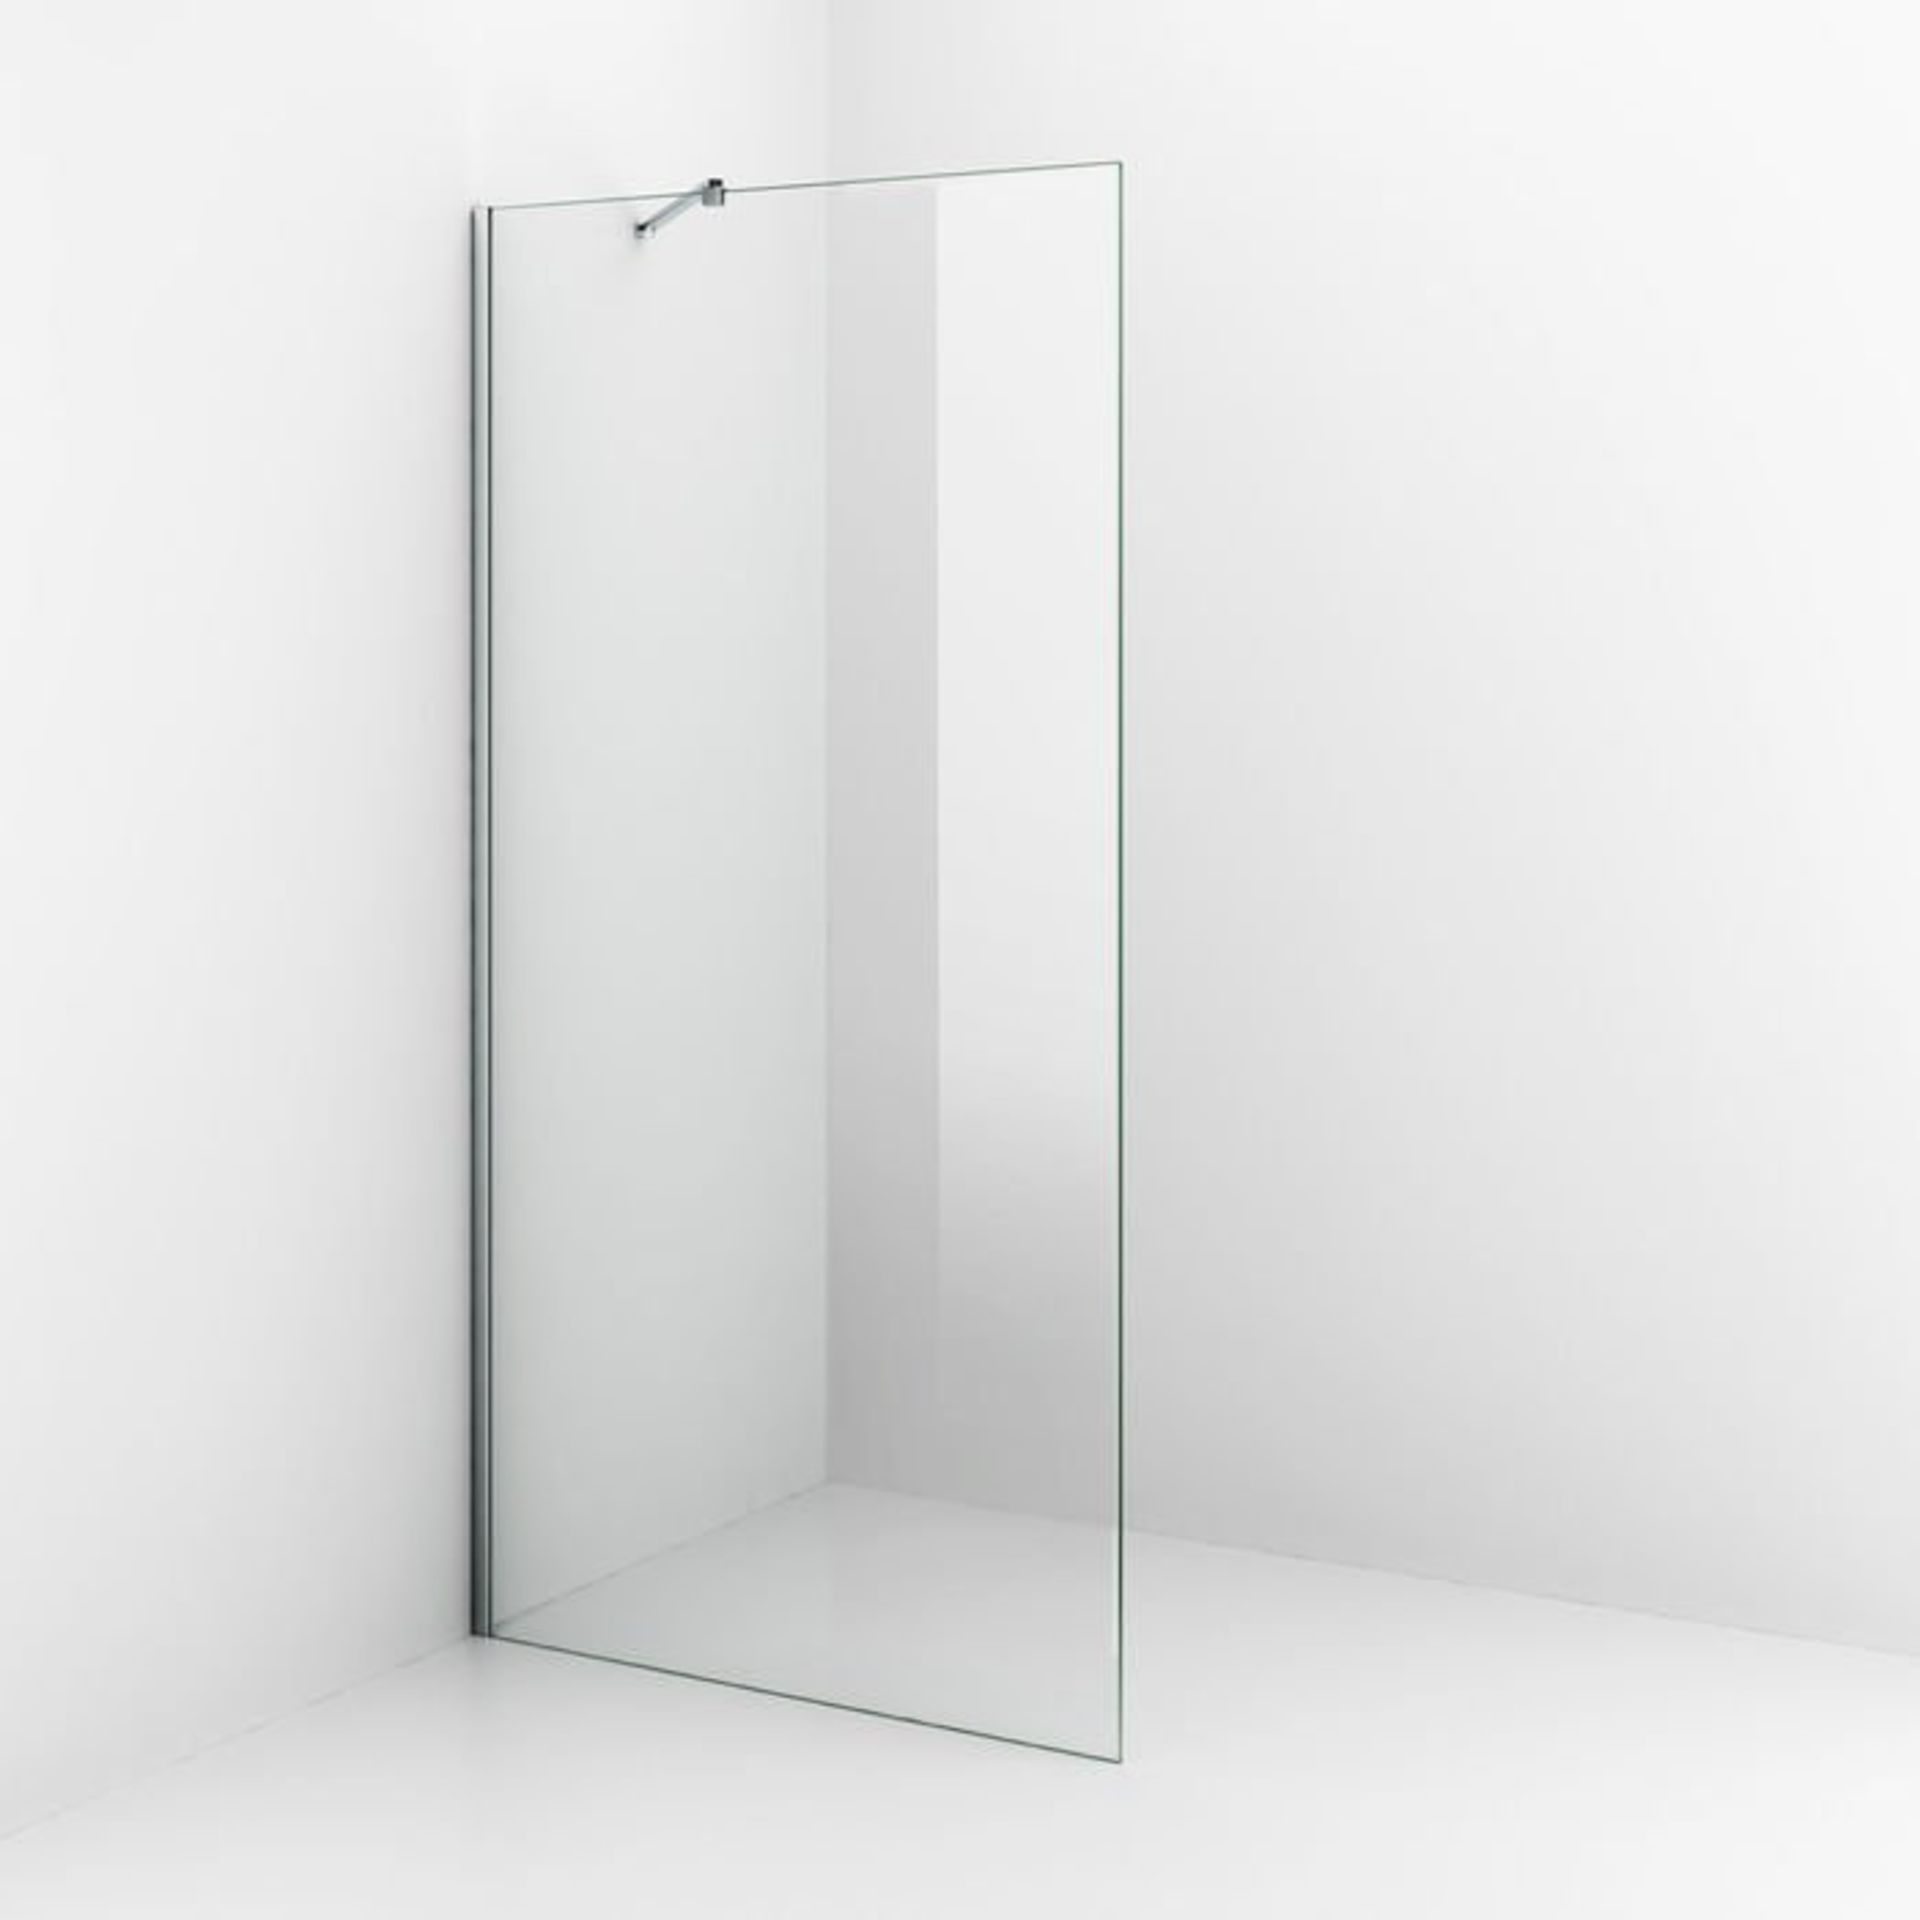 (S19) 1000mm - 8mm - Premium EasyClean Wetroom Panel RRP £499.99 8mm EasyClean glass - Our glass has - Image 4 of 7